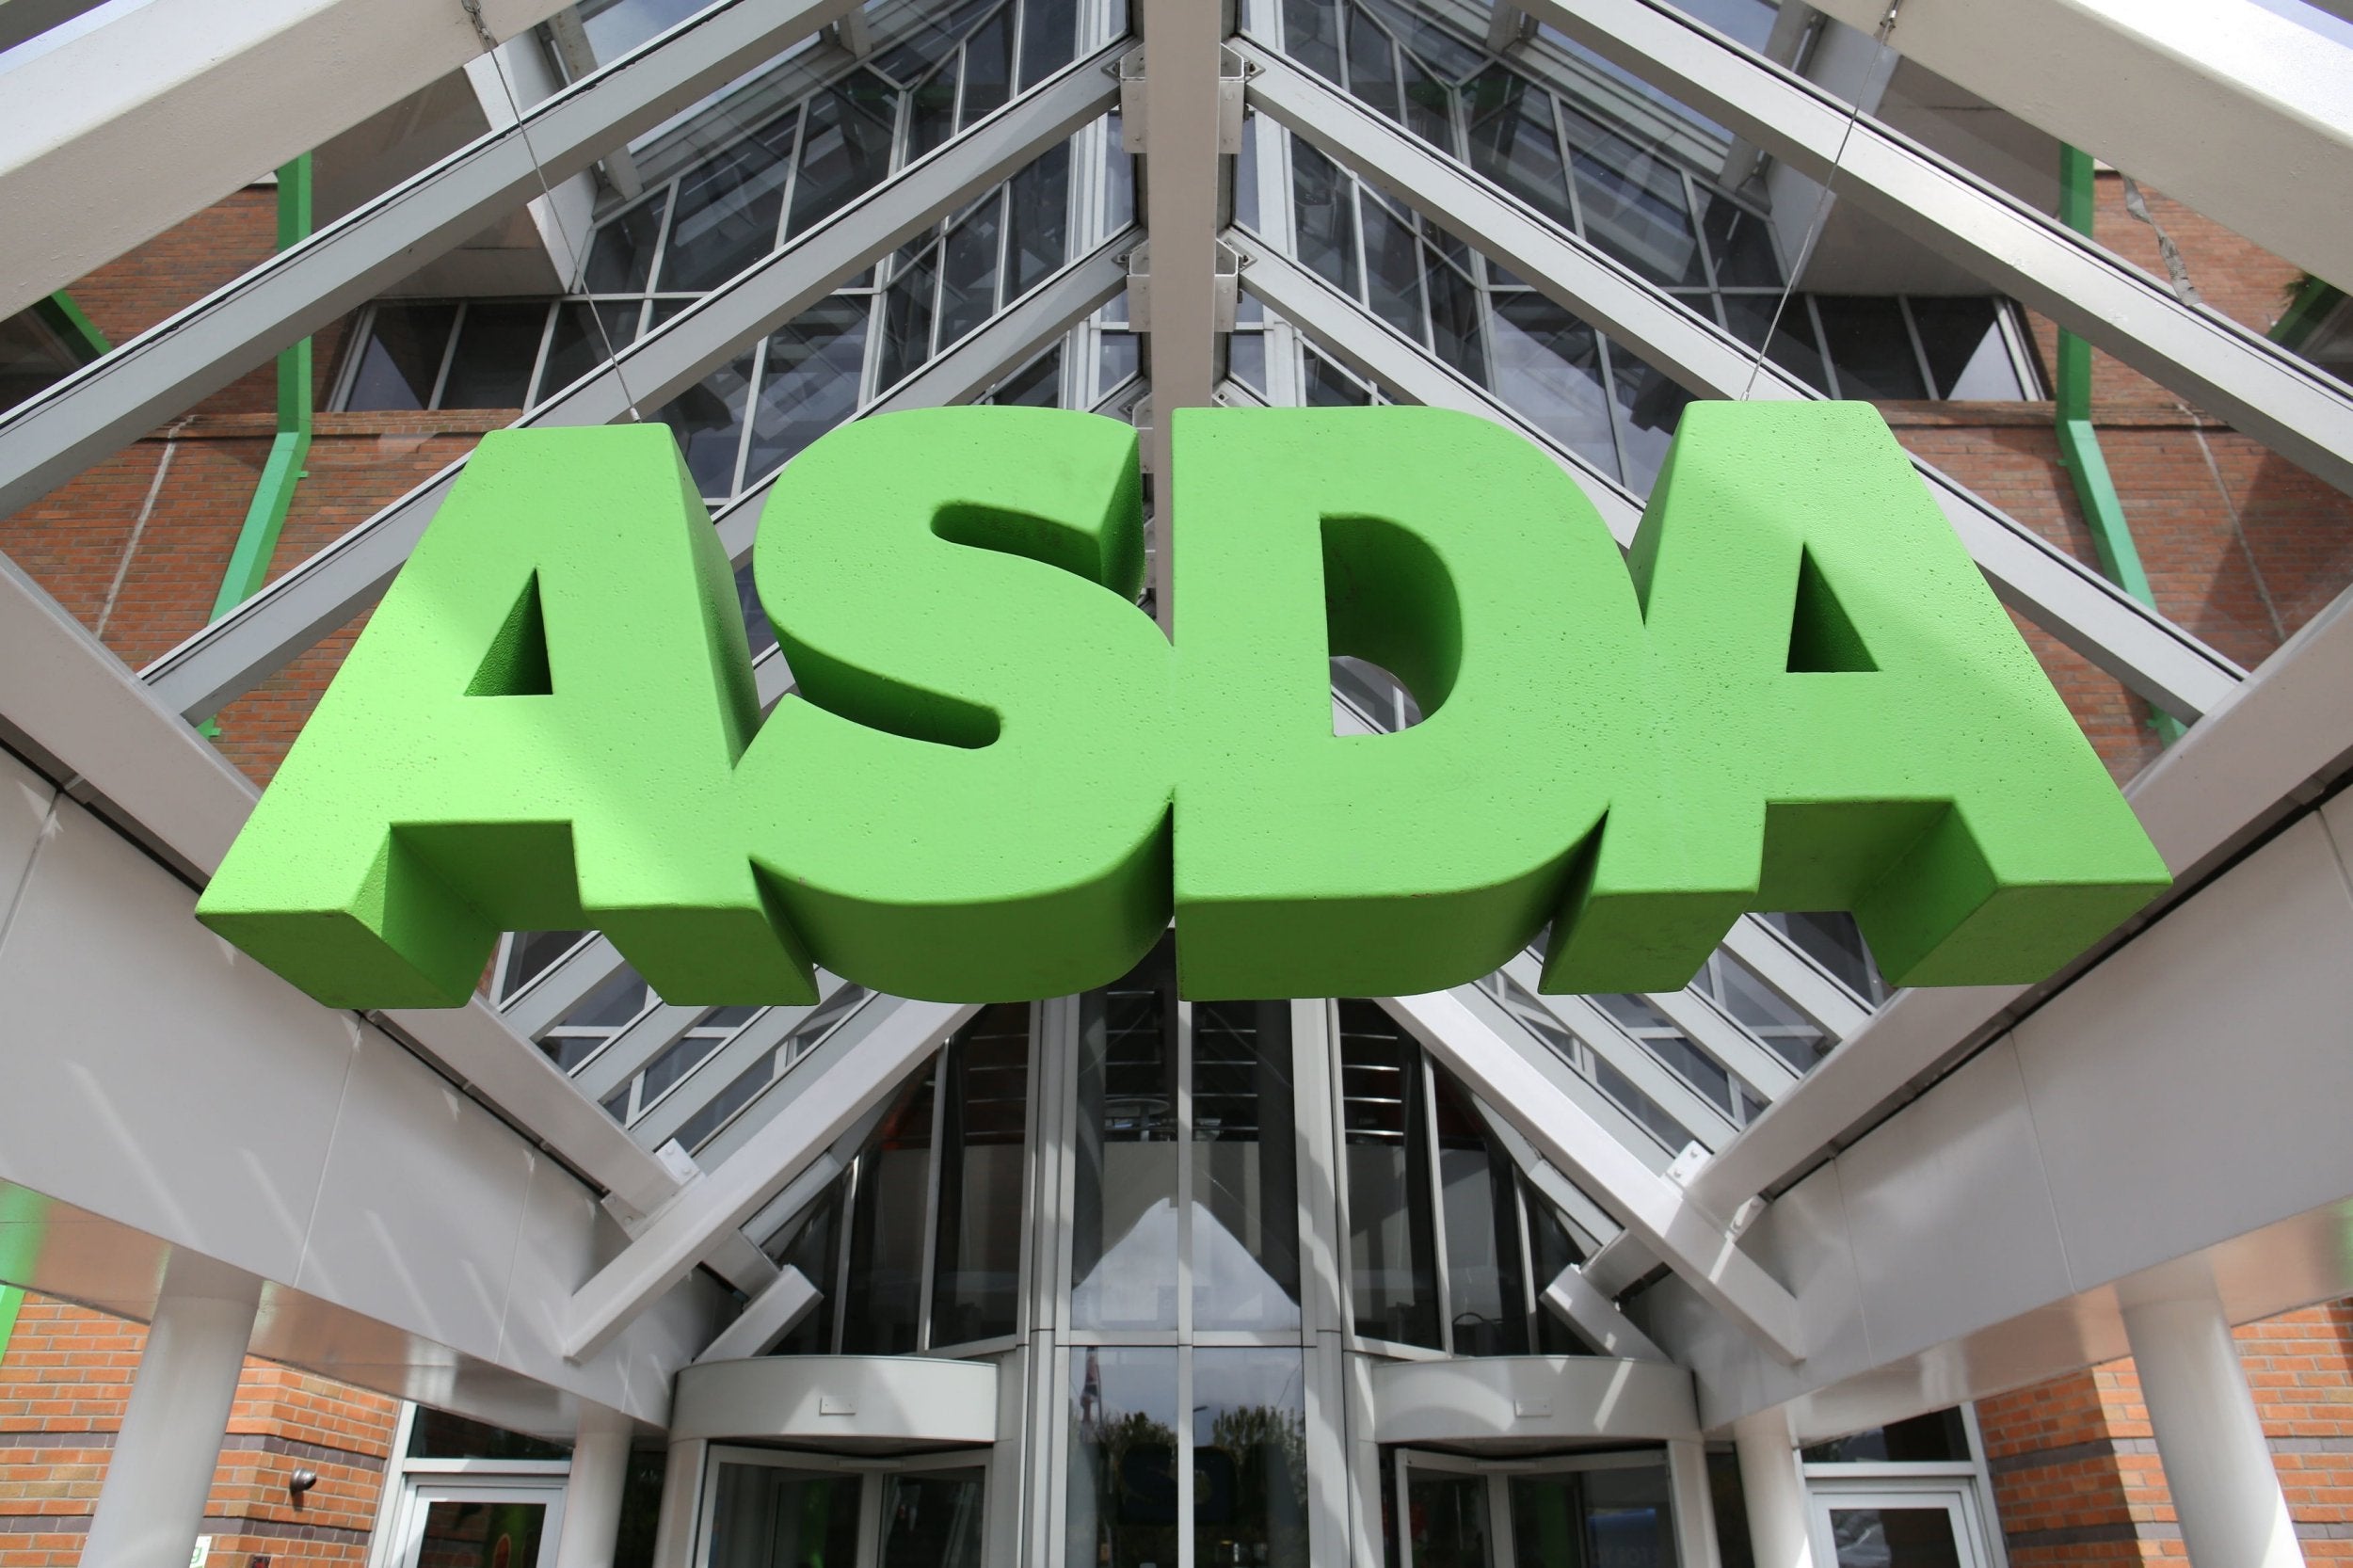 Asda faces an equal pay claim from thousands of shop workers